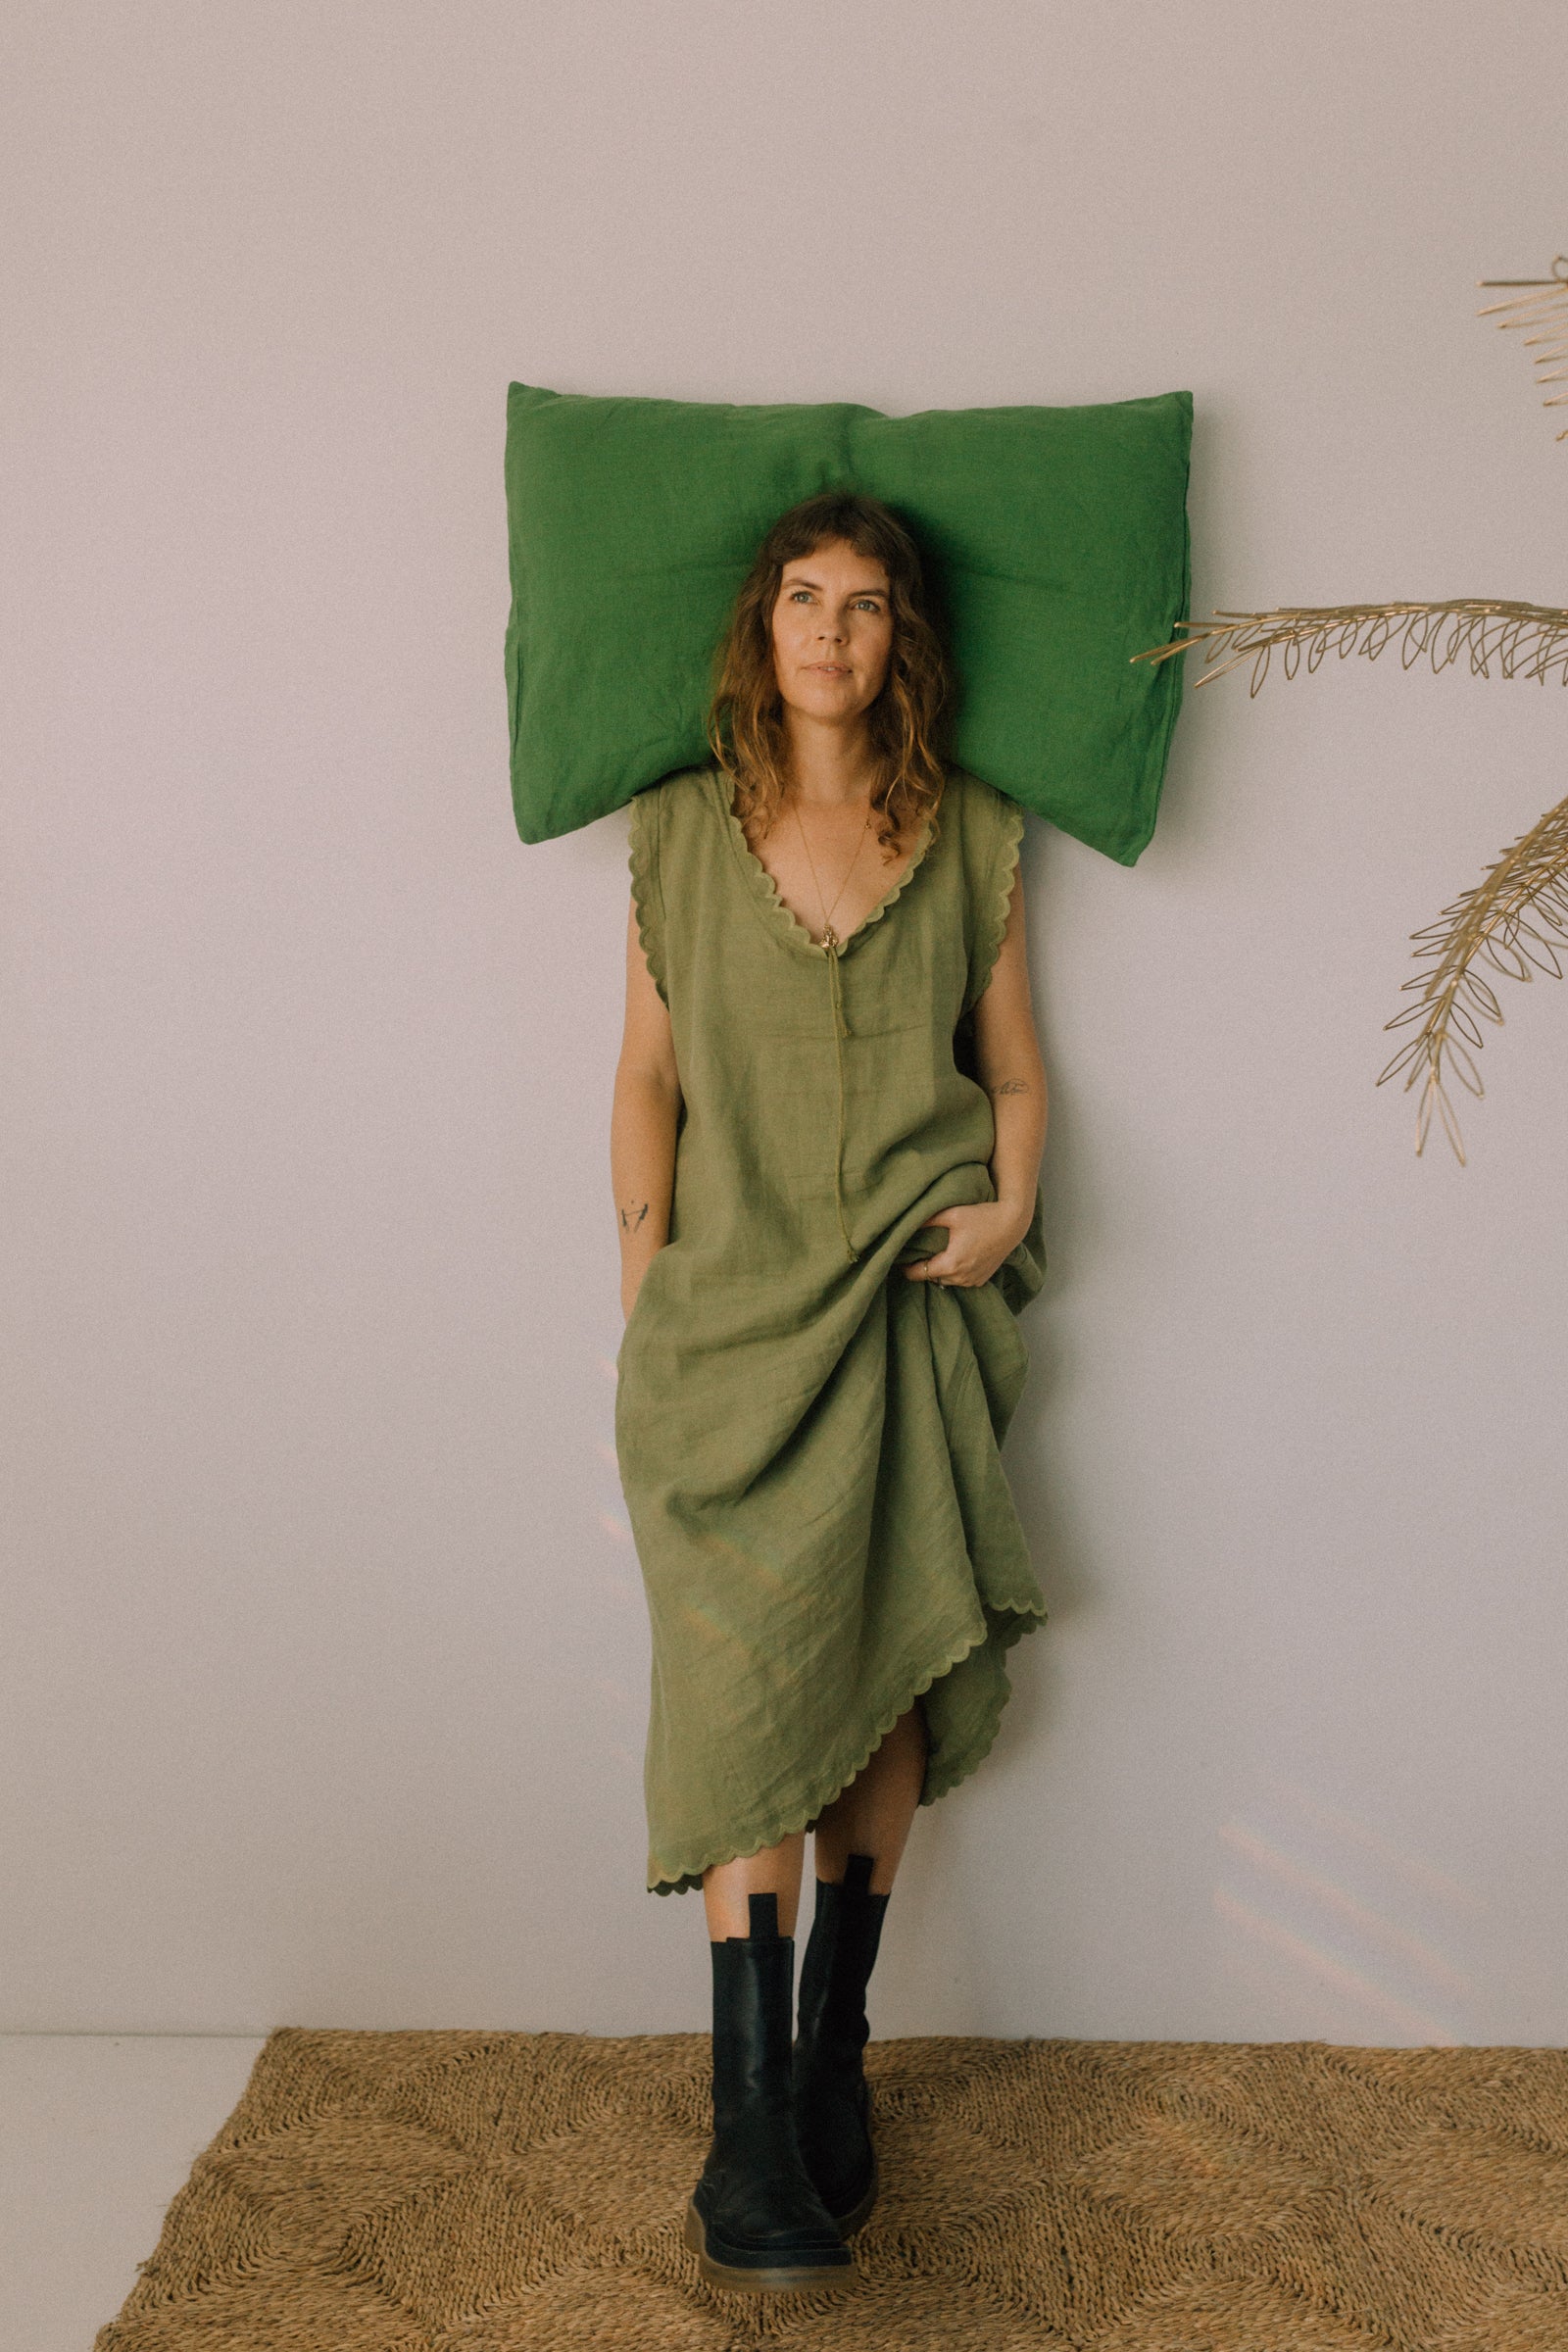 NEW NOW: French linen clothing, in Palm Green. A beautiful 70's